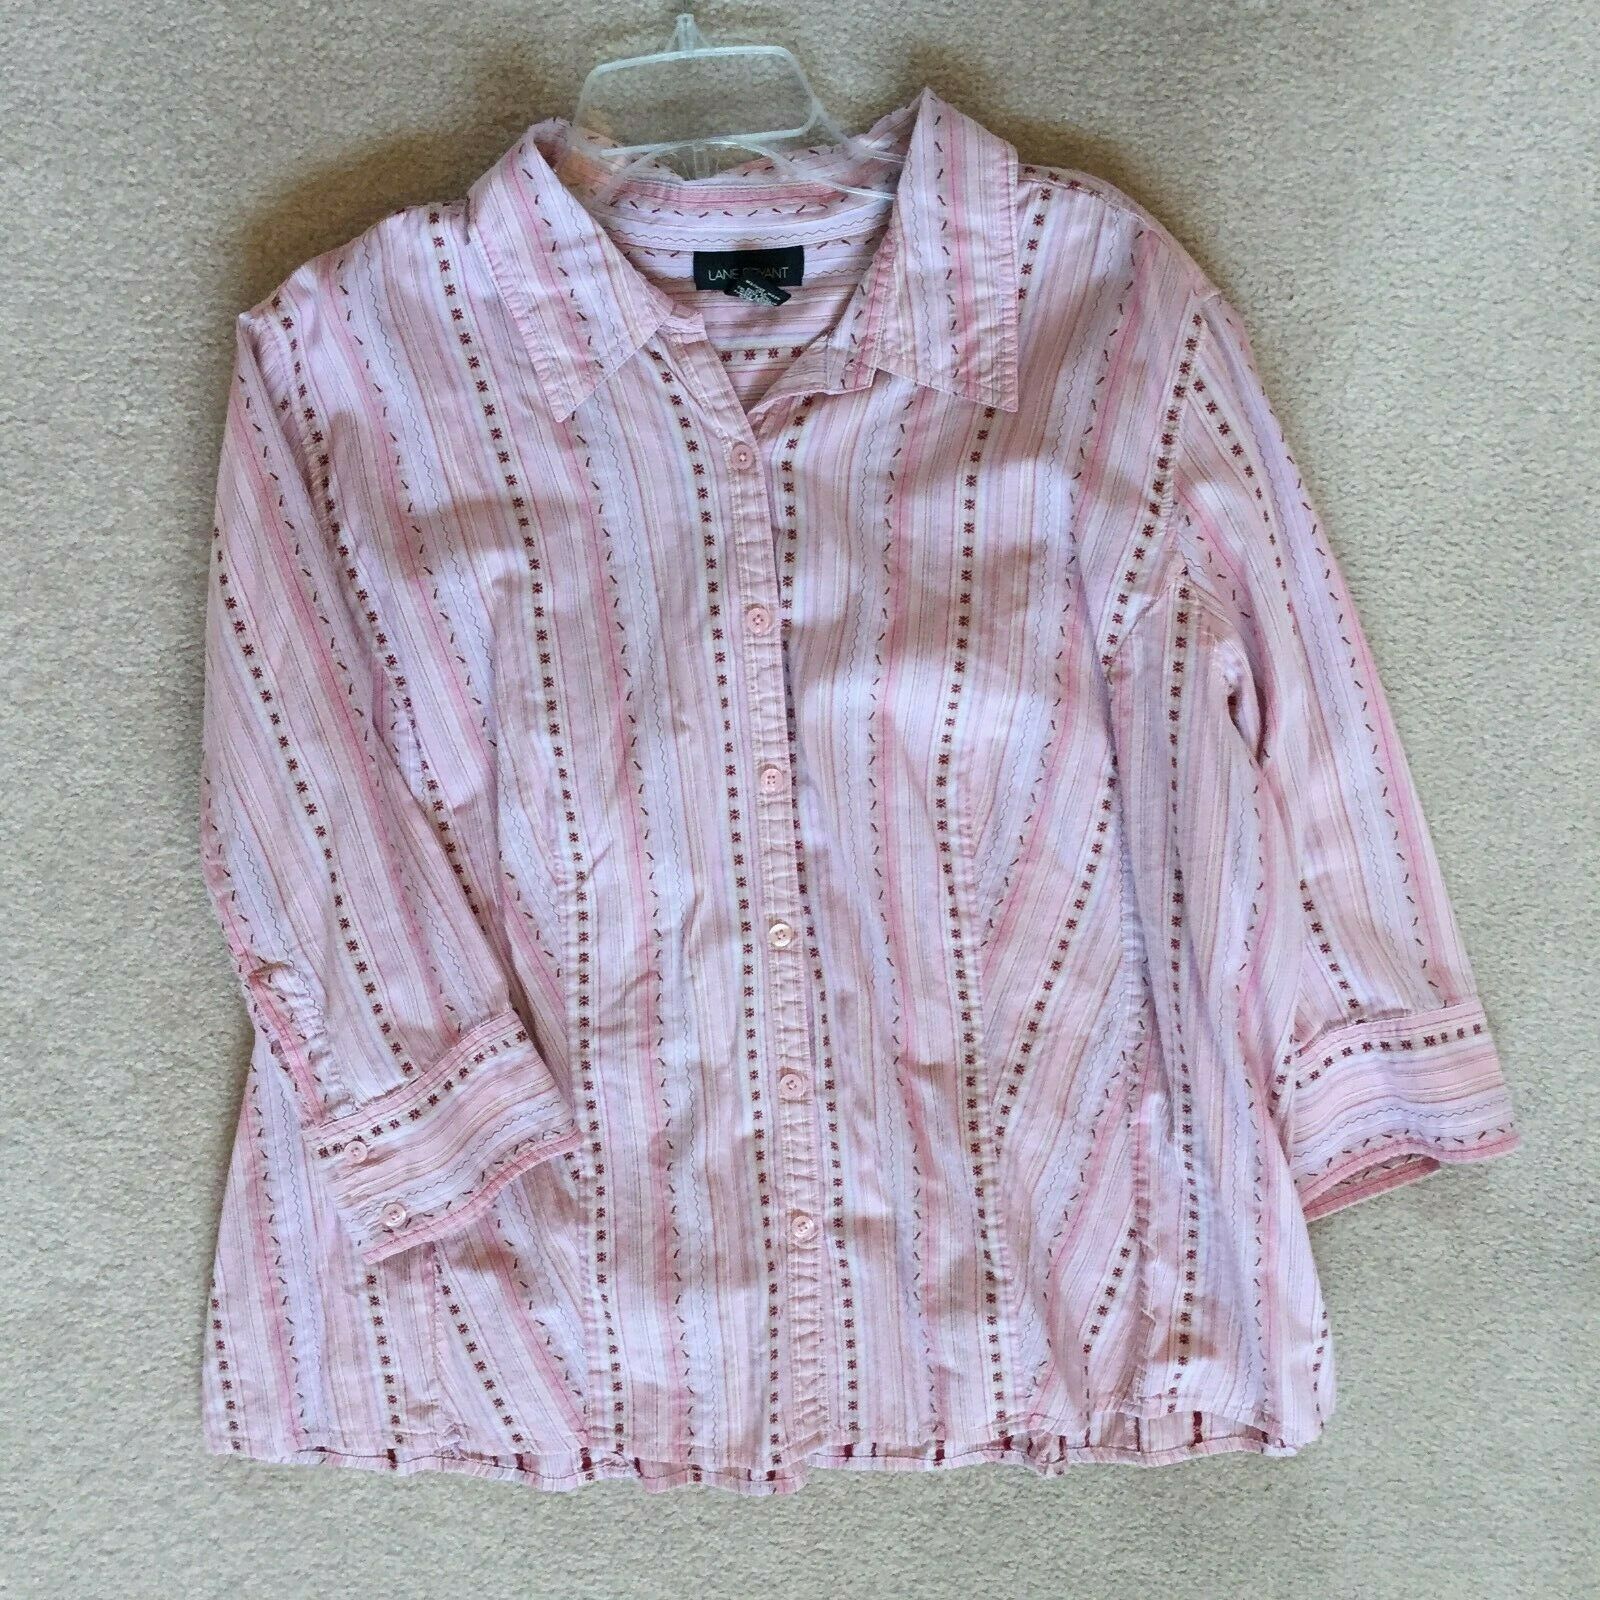 Primary image for * Lane Bryant Vintage Pastel Pink Striped Button Down front Top Blouse Size 22/